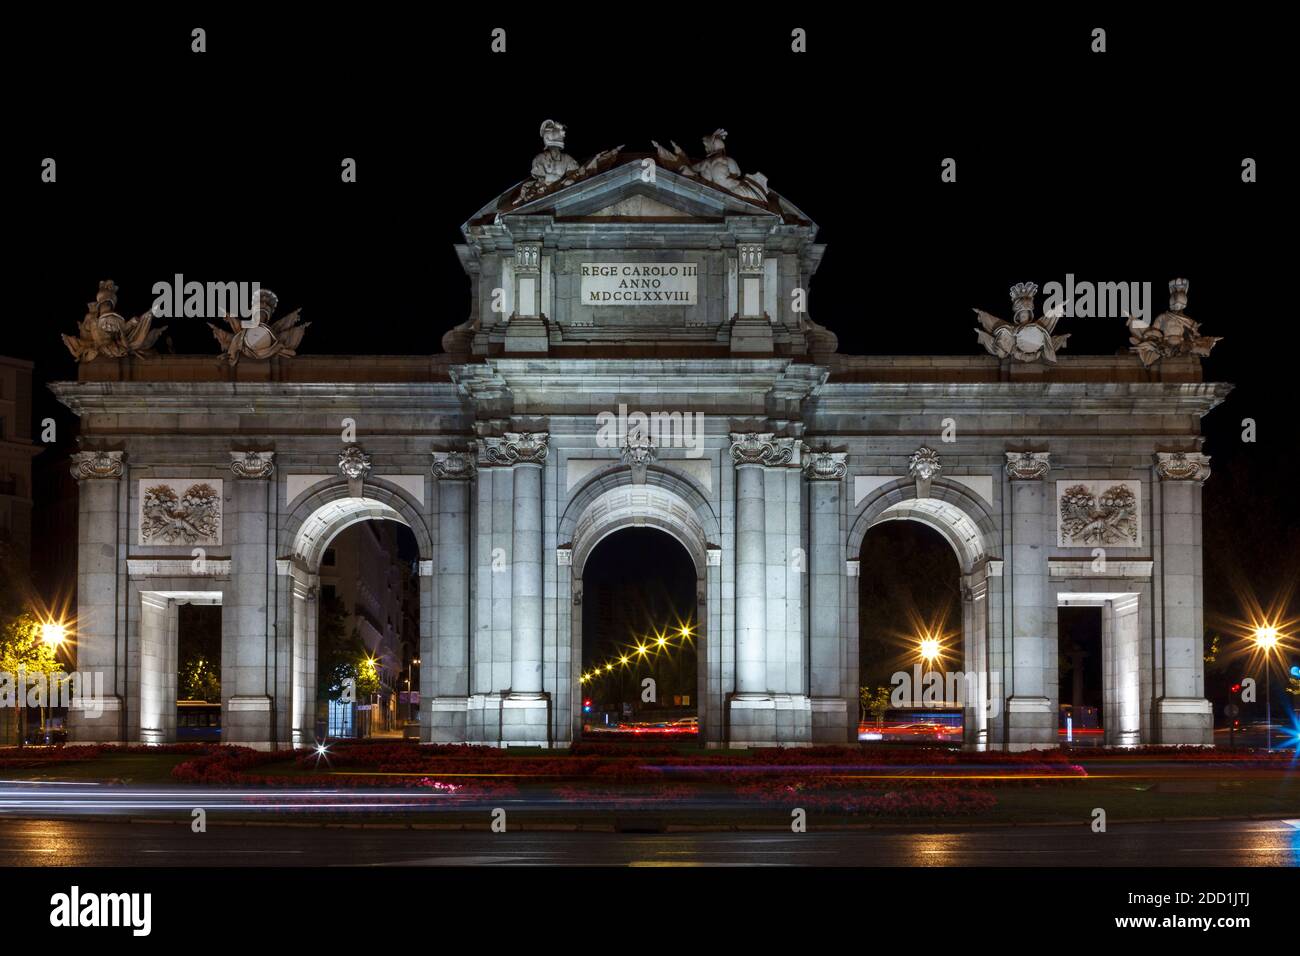 The Gate of Alcala (or Puerta de Alcala, in Spanish), probably the most impressive ached gate that can be seen in Madrid, Comunidad de Madrid, Spain, Stock Photo